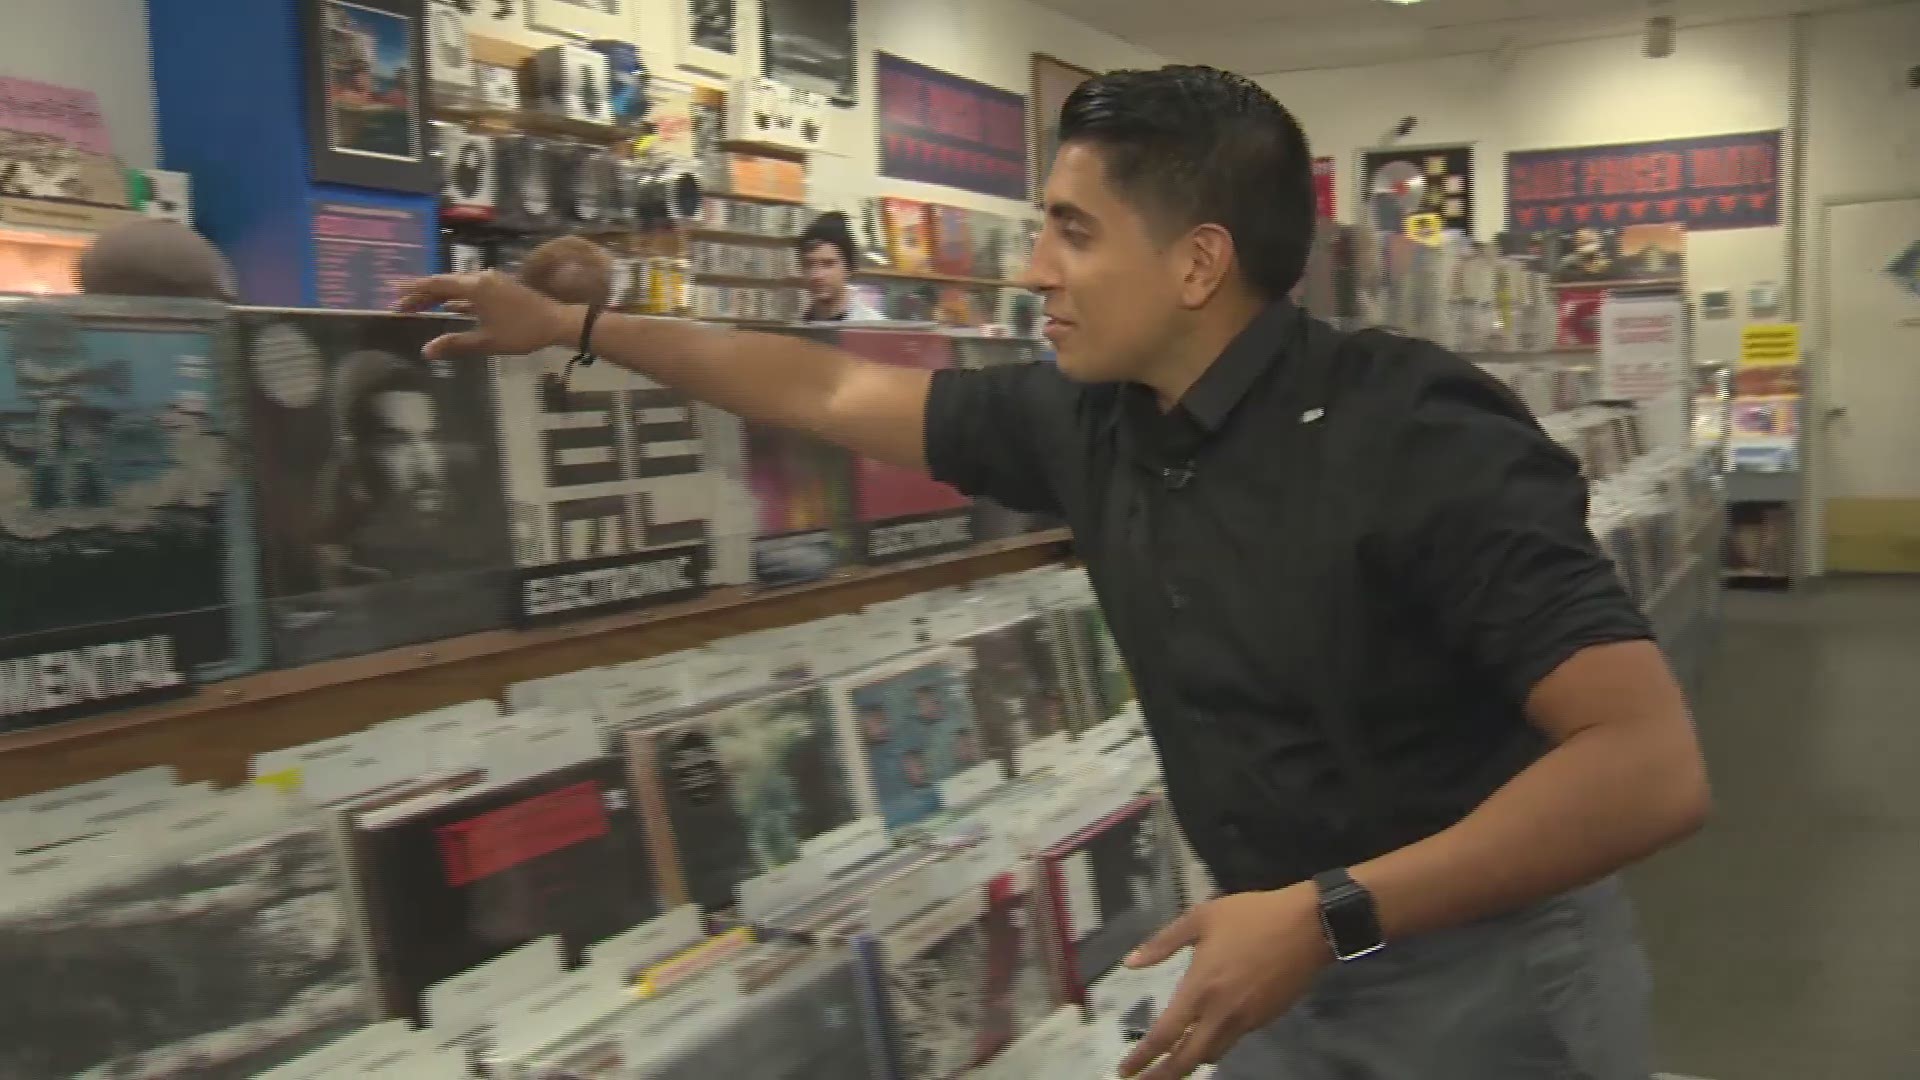 When you think about Austin, art and music likely come to mind and what better way to avoid those long lines on Black Friday than to shop at one of Austin's oldest record stores.
STORY: http://www.kvue.com/news/local/hundreds-skip-black-friday-shopping-a